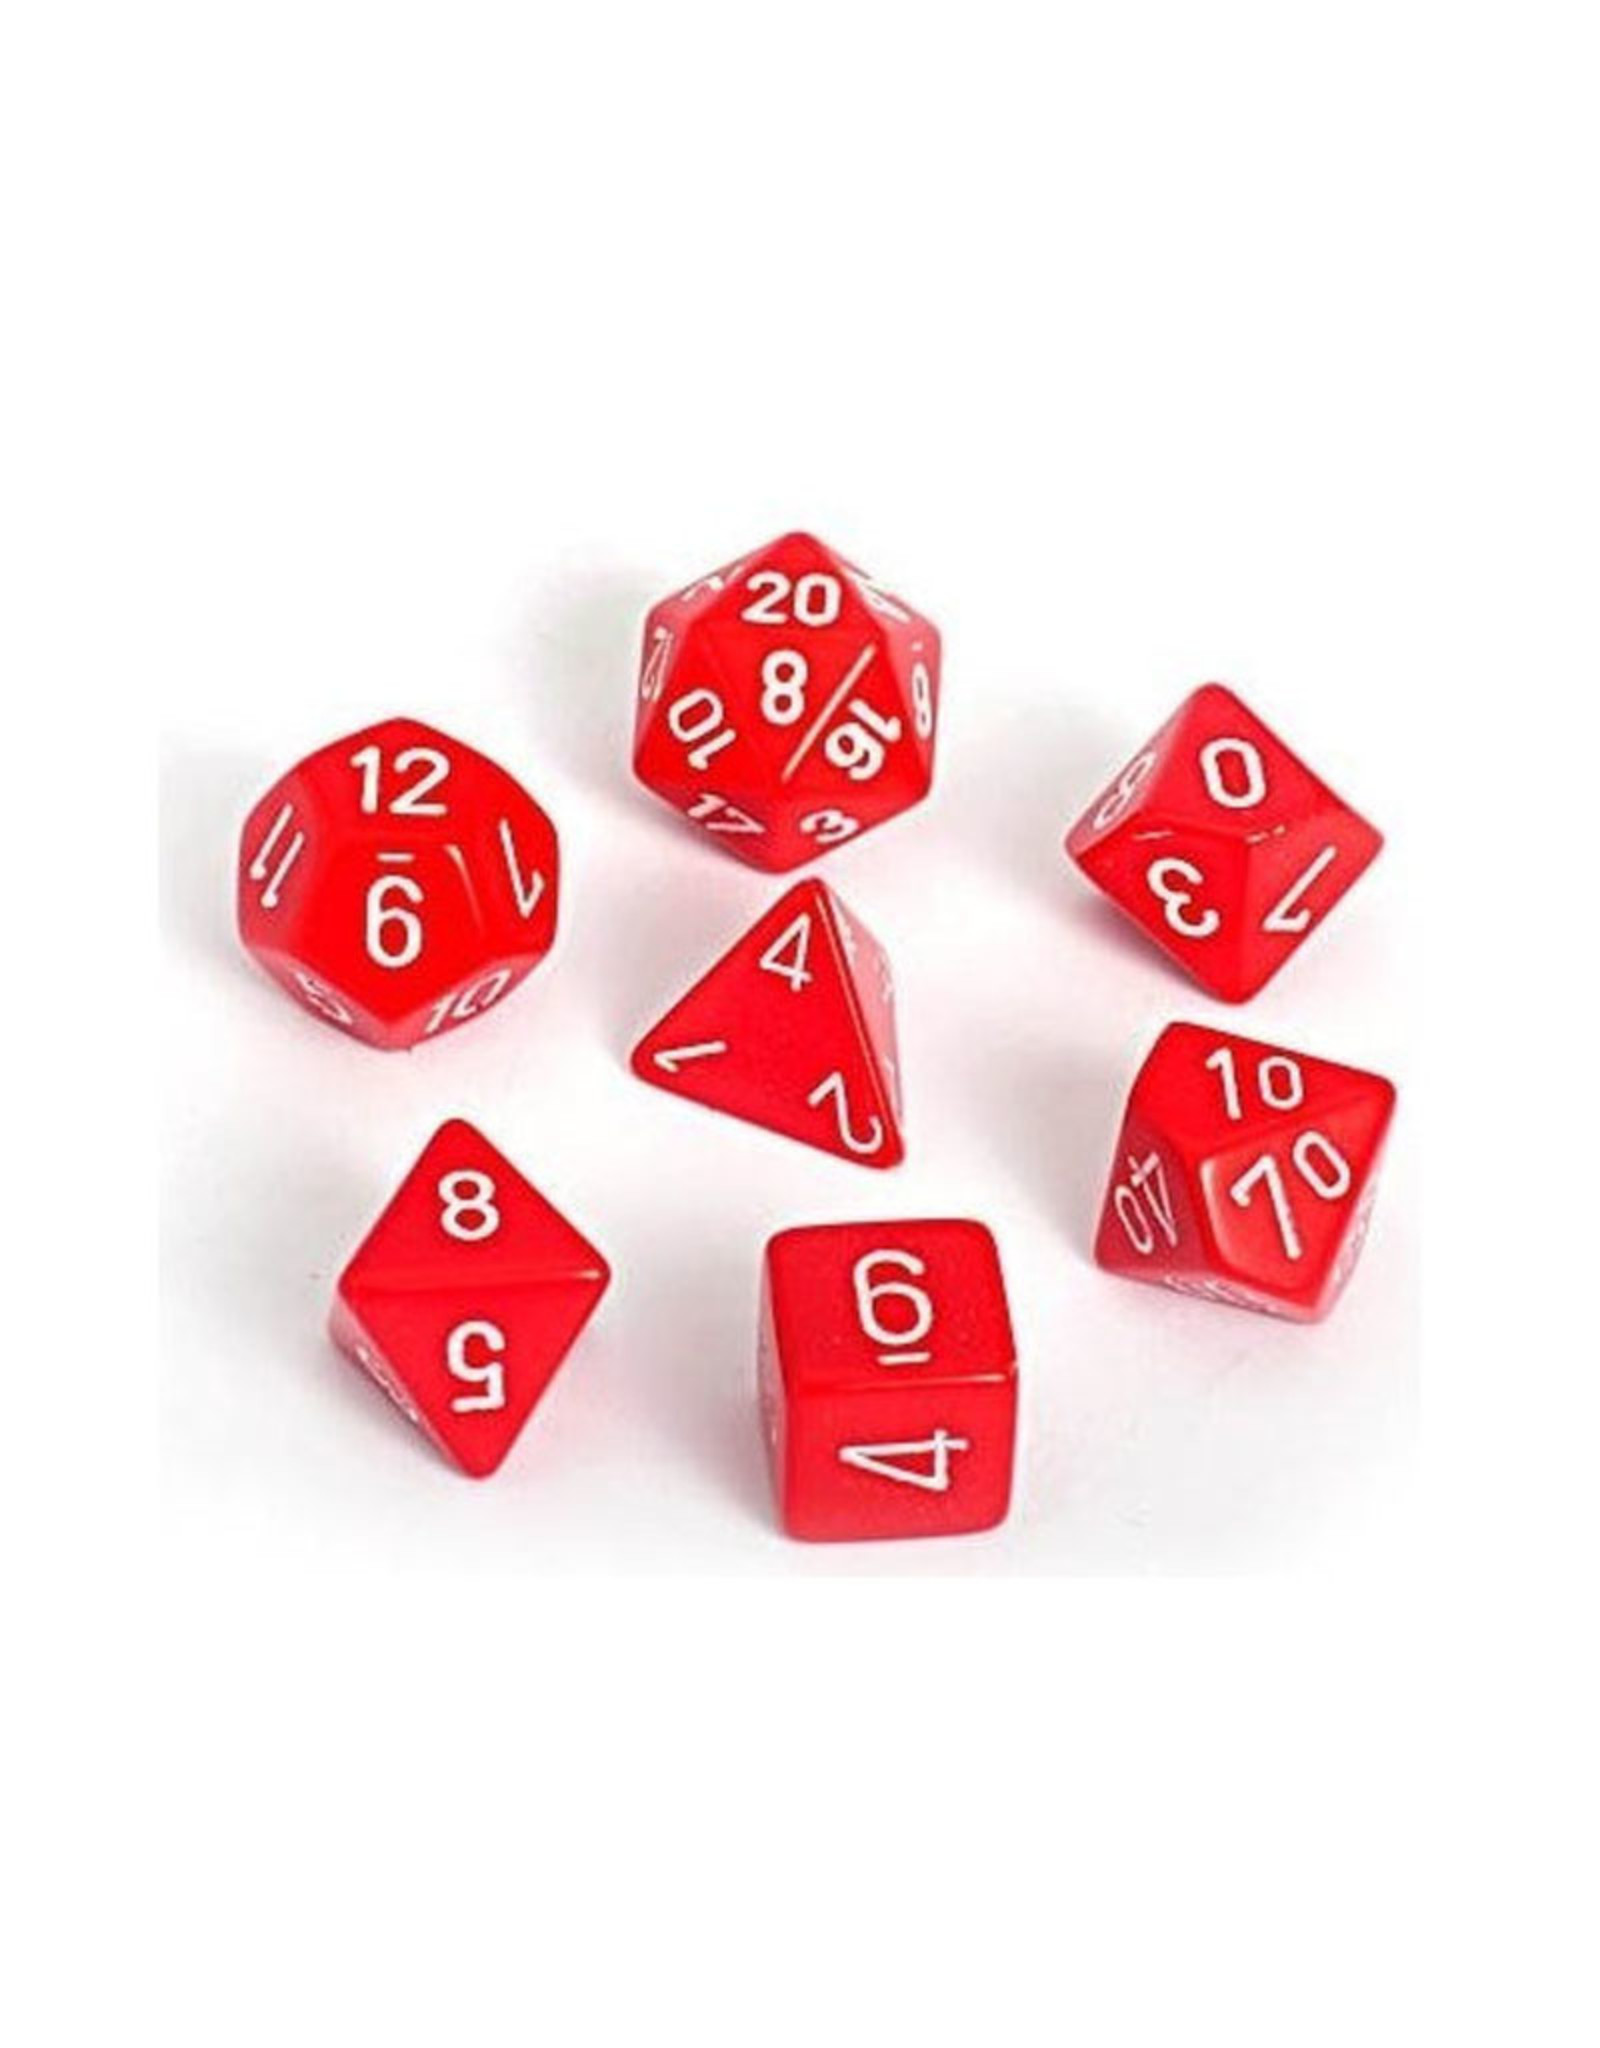 Chessex 7Ct Dice Set CHX25404 Opaque Red/White